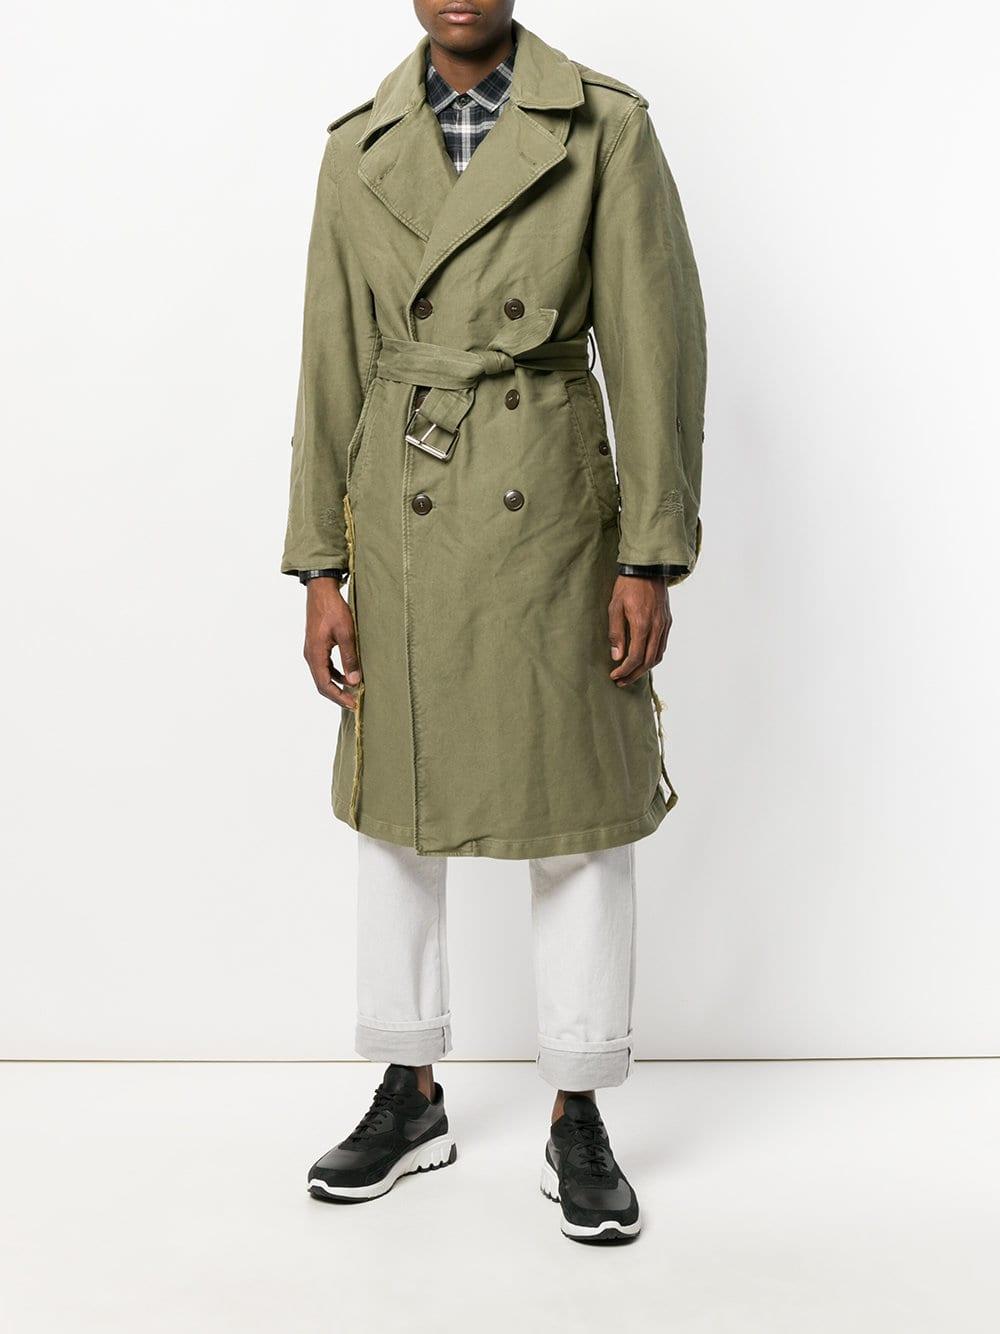 424 Cotton Fairfax X Alpha Military Trenchcoat in Green for Men - Lyst